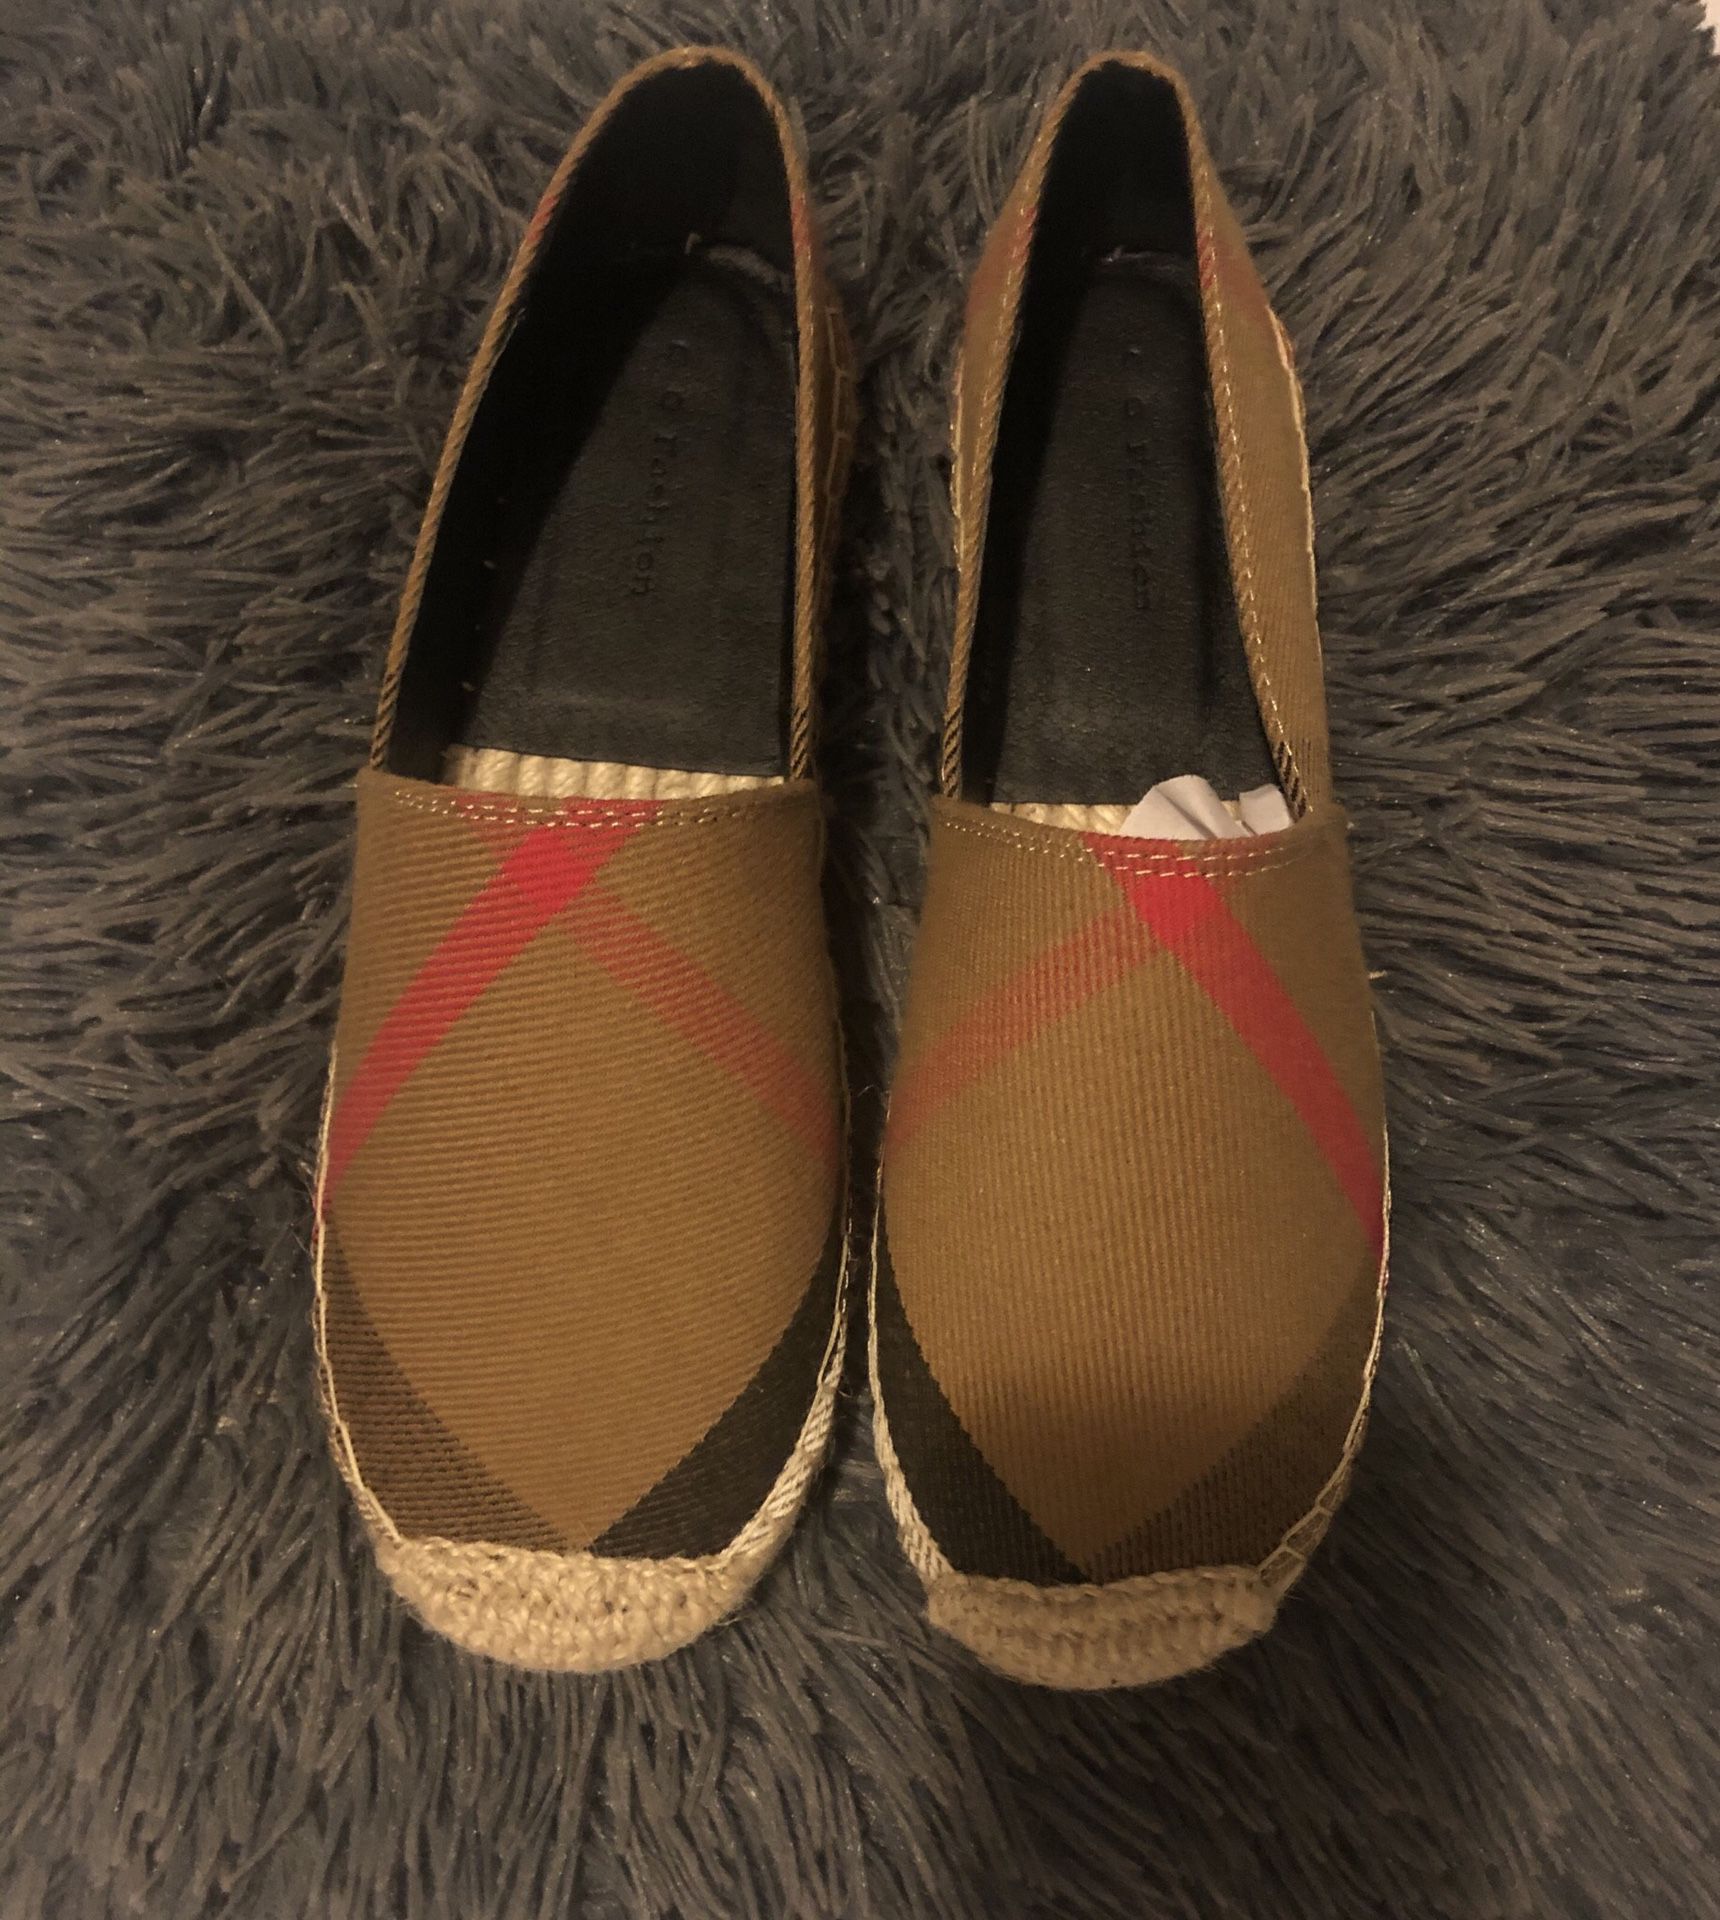 Burberry Style Shoes